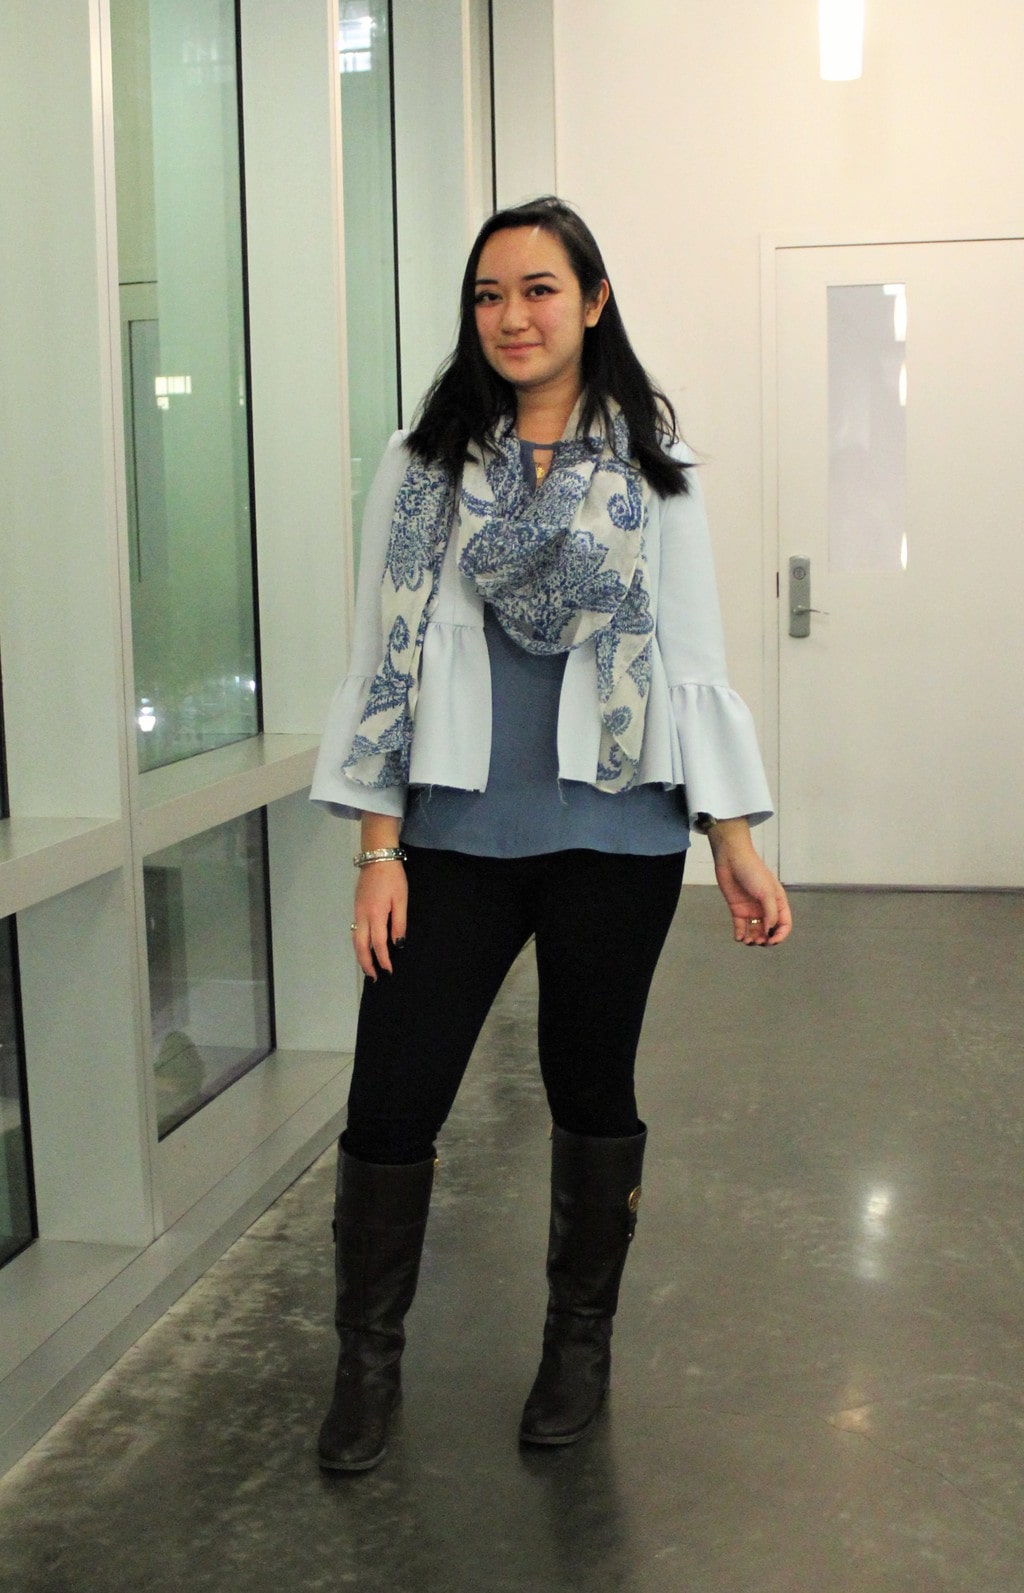 A Barnard College at Columbia University student wears a blue top with a sky blue jacket and a blue and white paisley scarf. She pairs it with black leggings and brown riding boots.